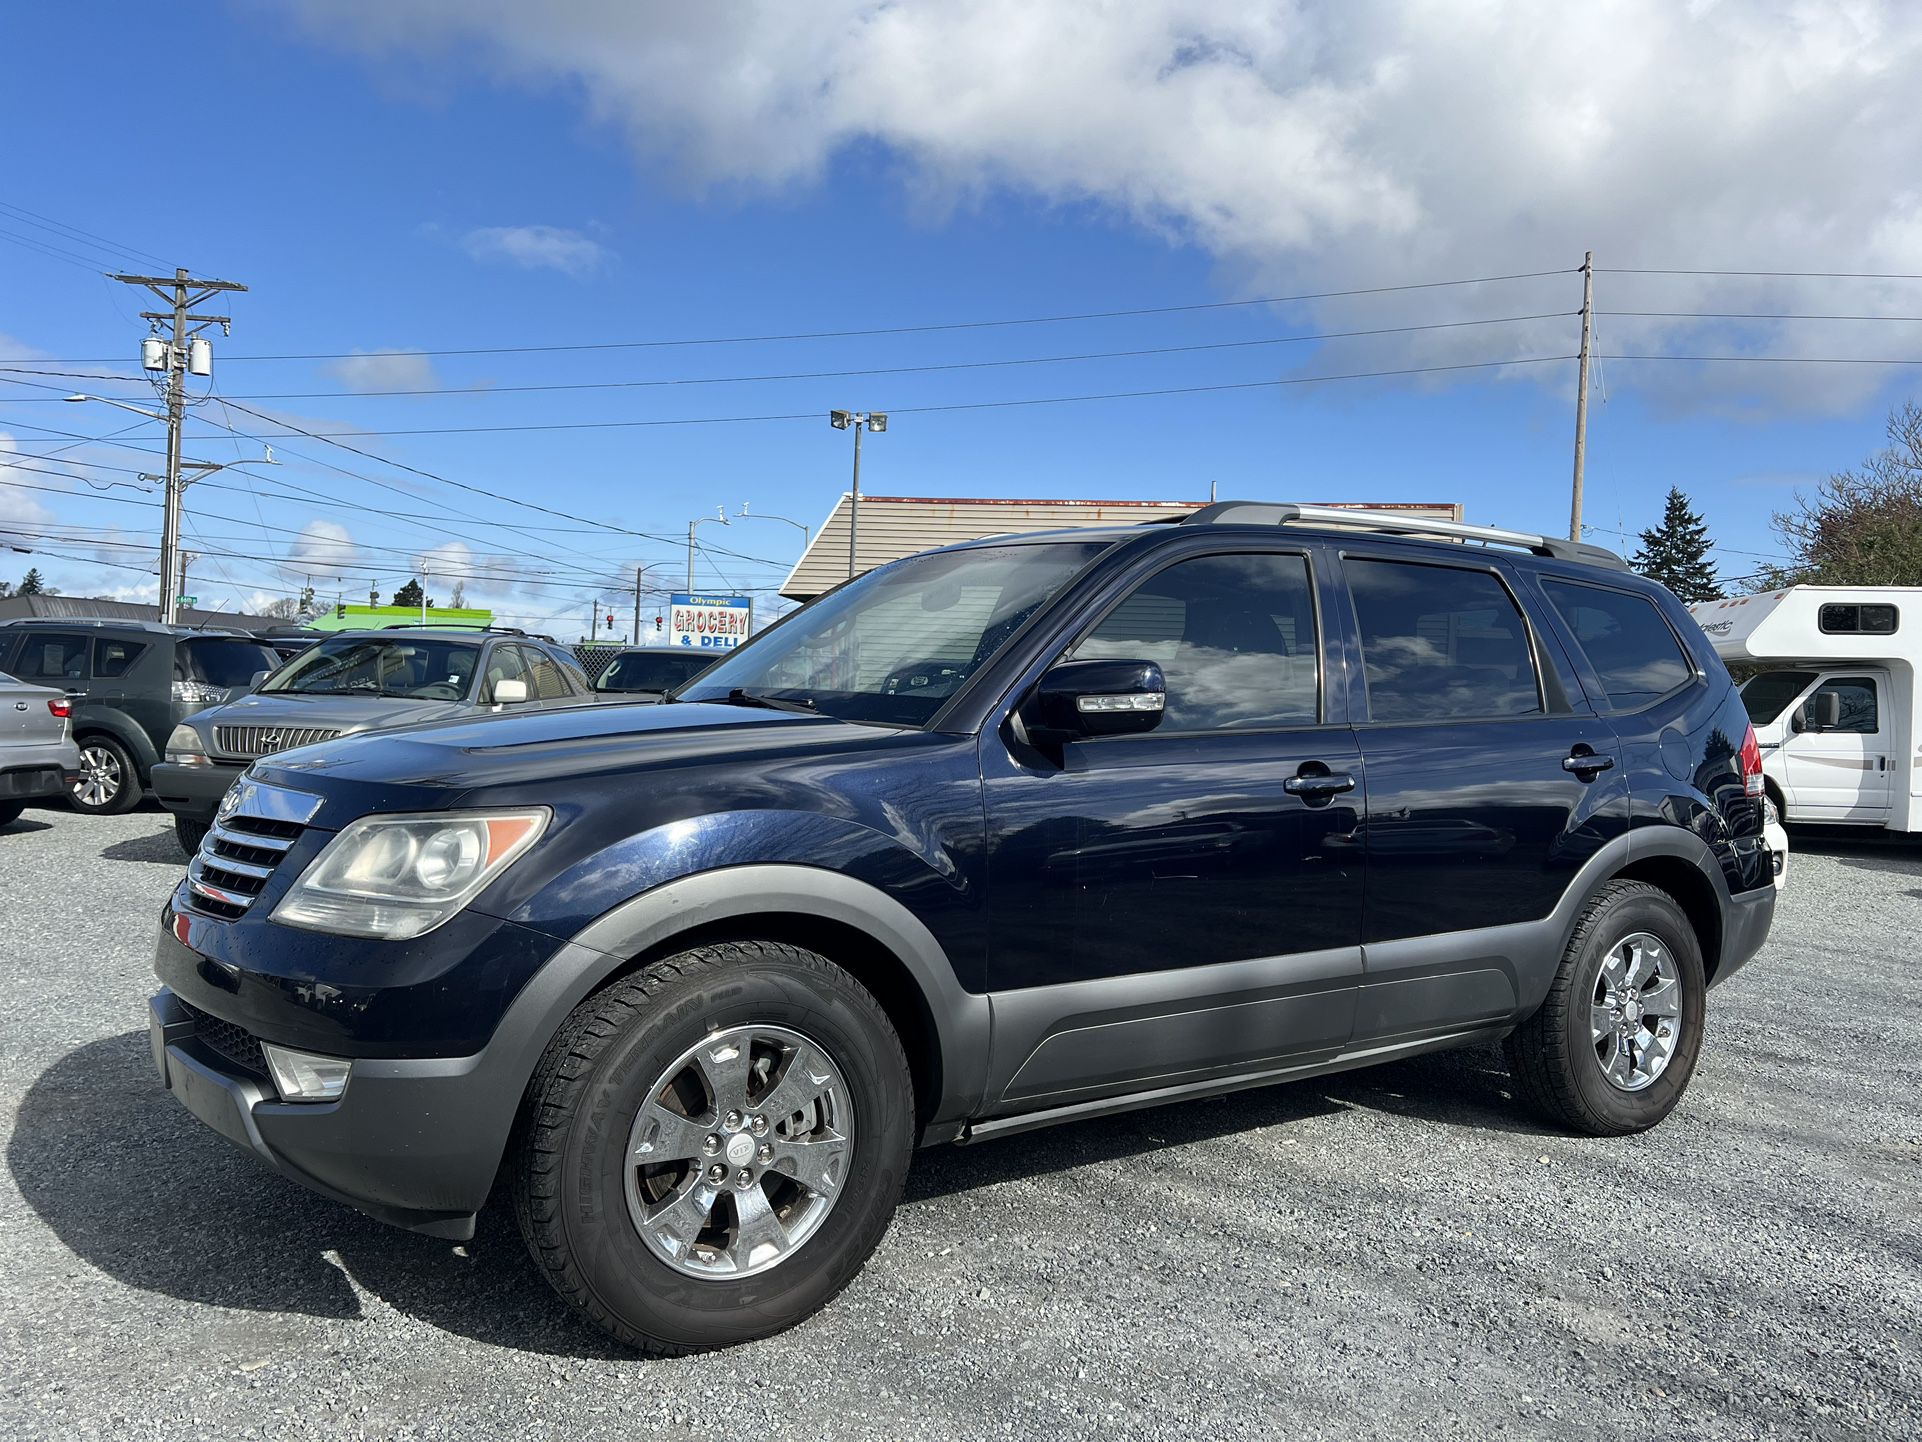 2009 Kia Borrego EX  V6 with auto transmission  Leather interior with 3rd row  Heated seats 229k miles Runs and drives great  Nice midsize suv  253-44